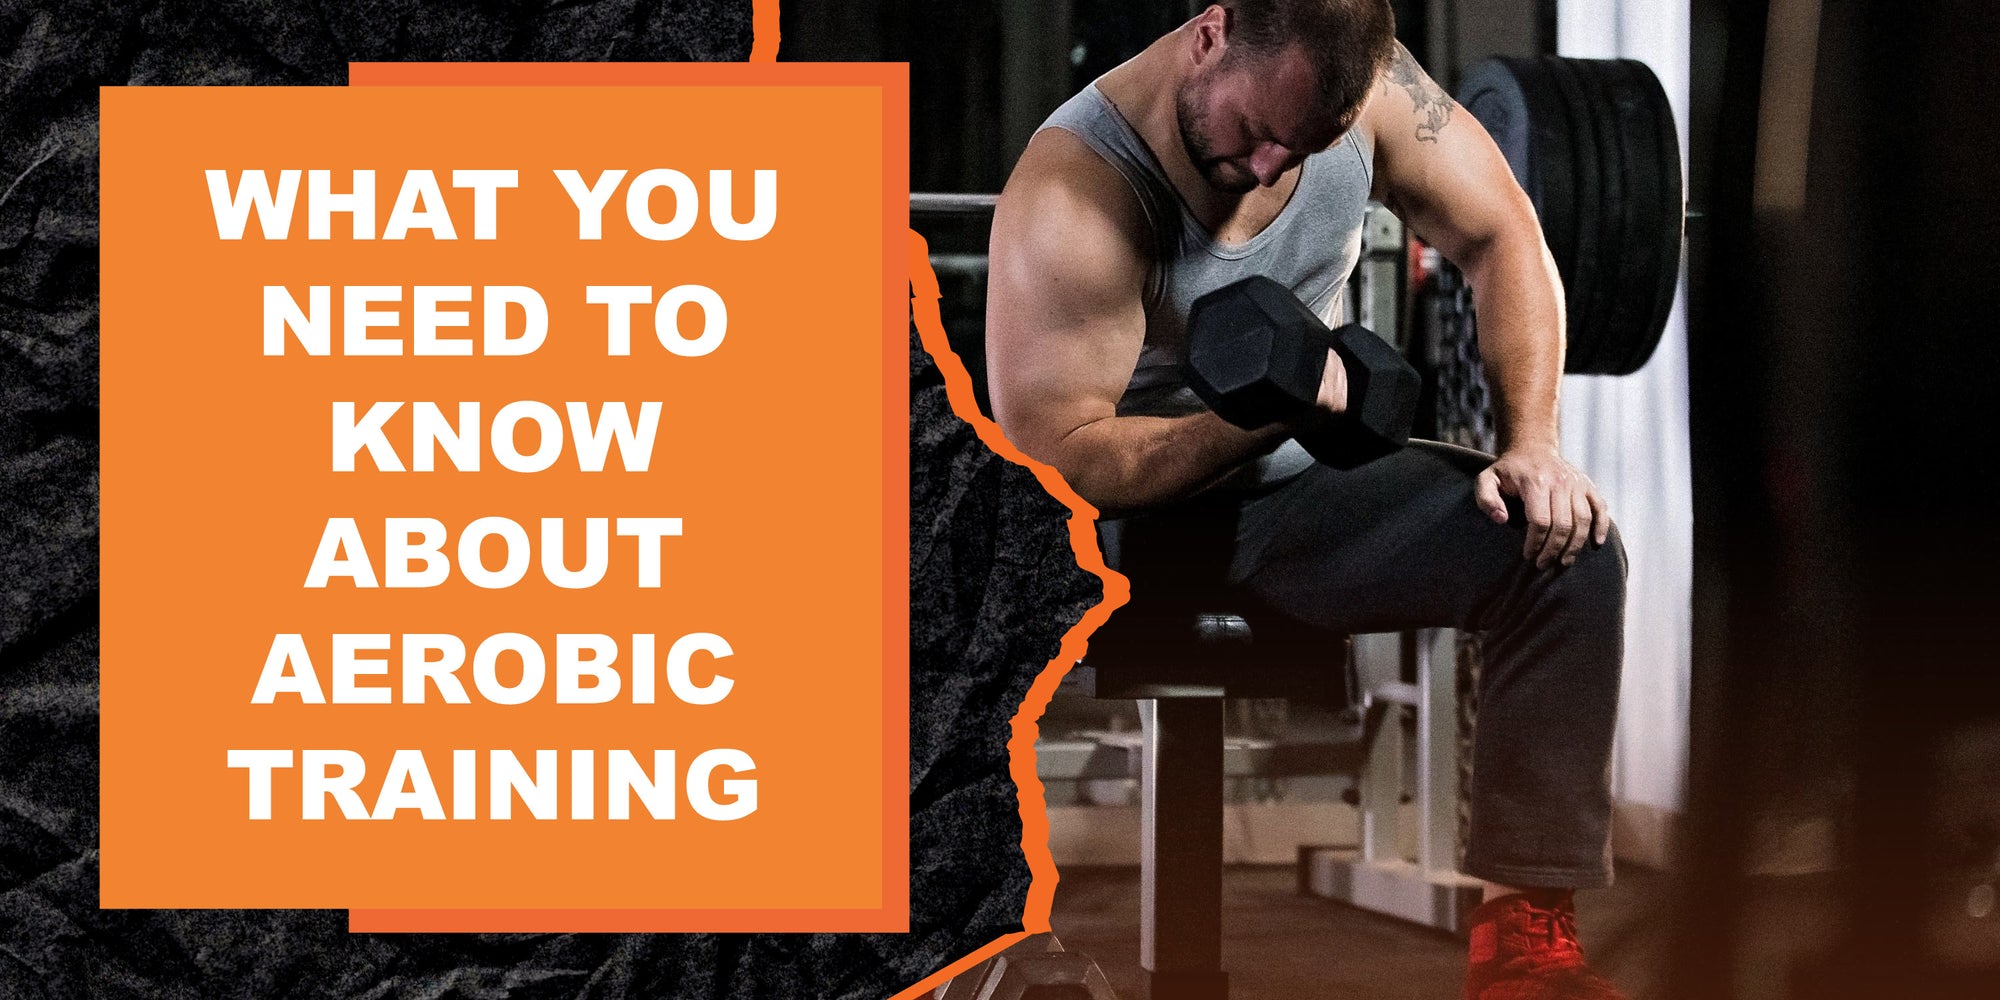 What You Need to Know About Aerobic Training